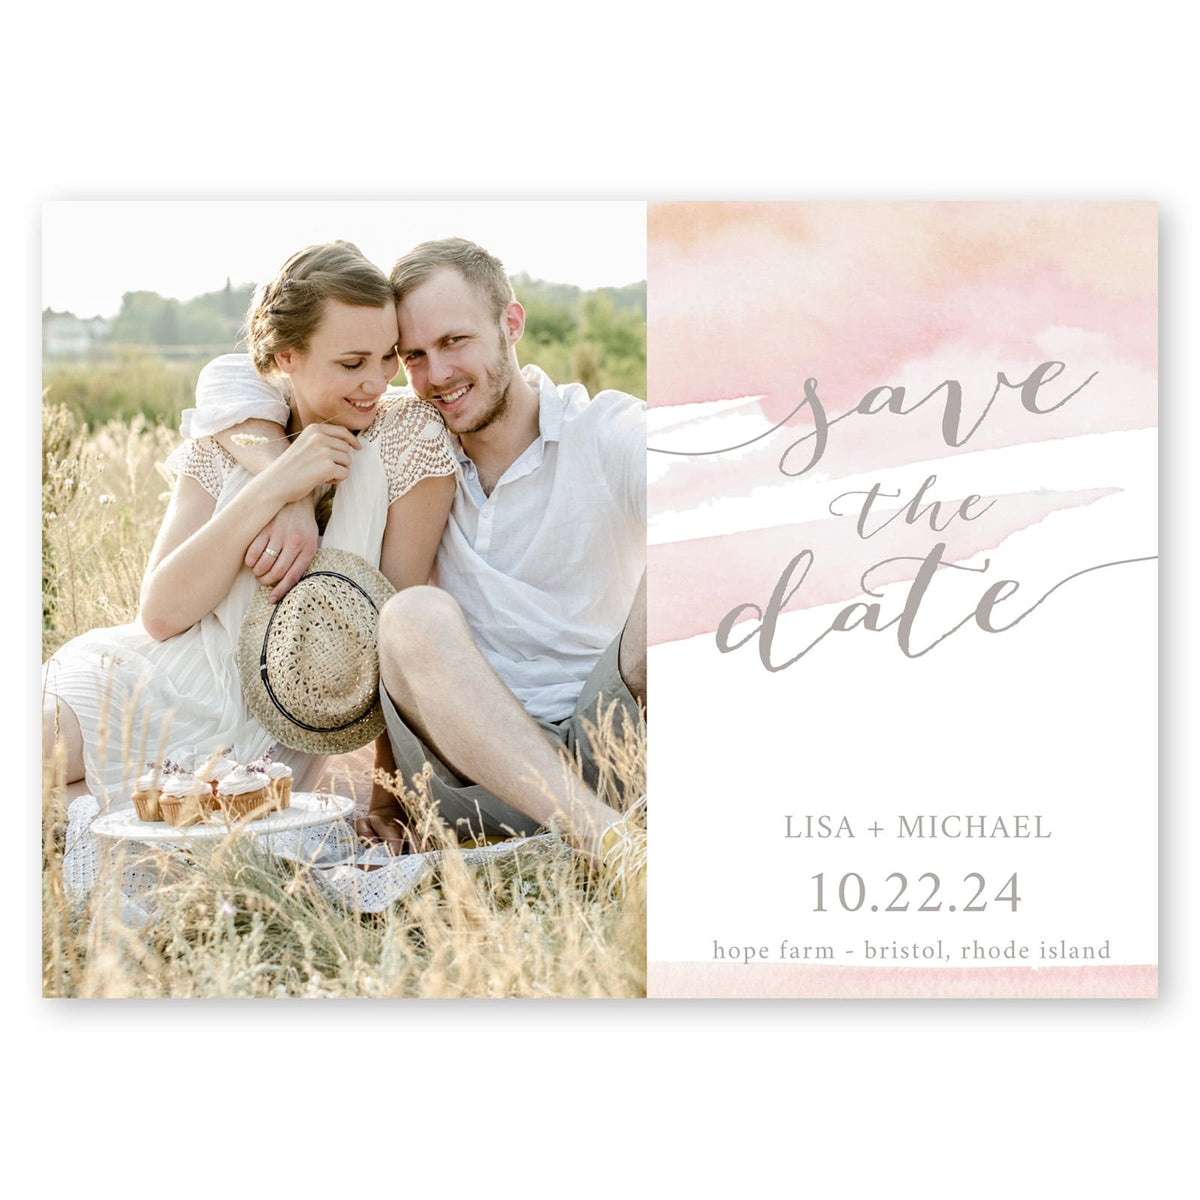 Watercolor Wash Save The Date Blush Gartner Studios Save The Dates 96044